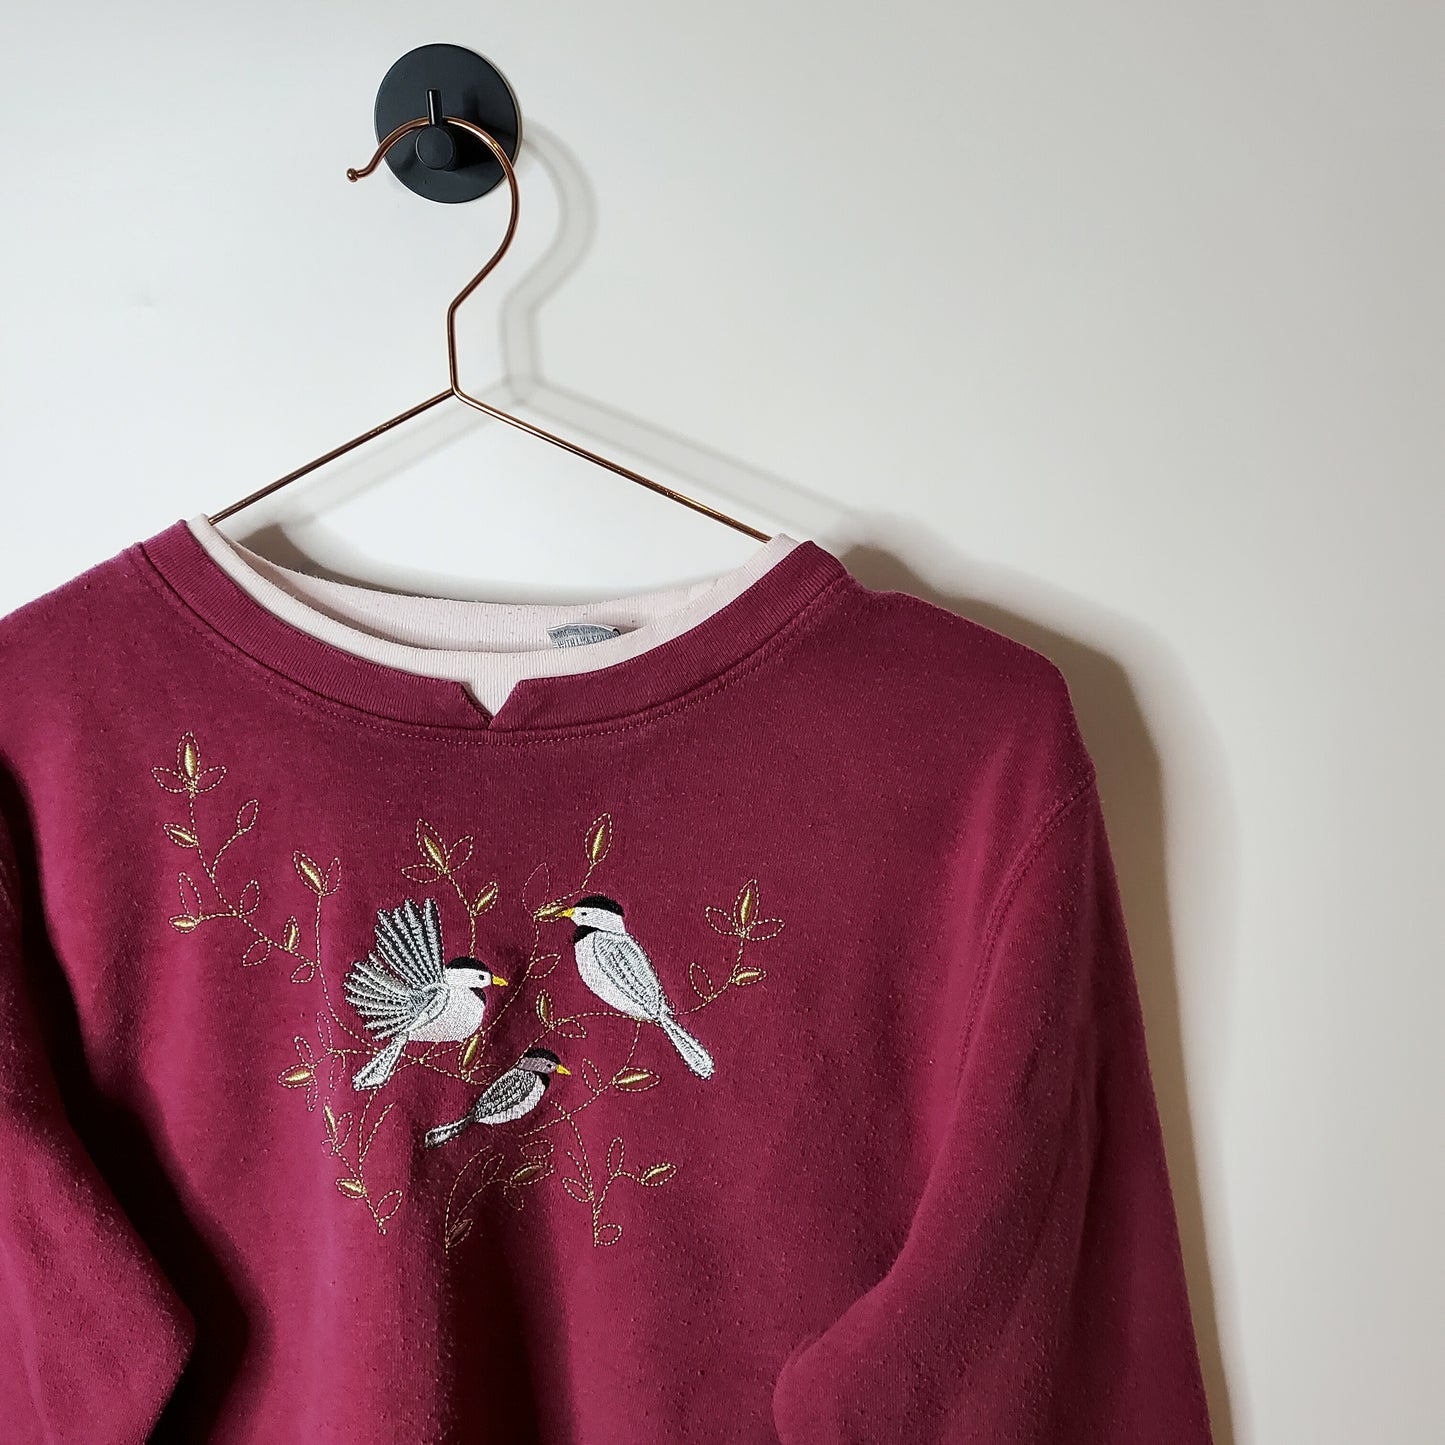 Vintage 90's Hastings and Smith Bird Sweatshirt Pink Size M